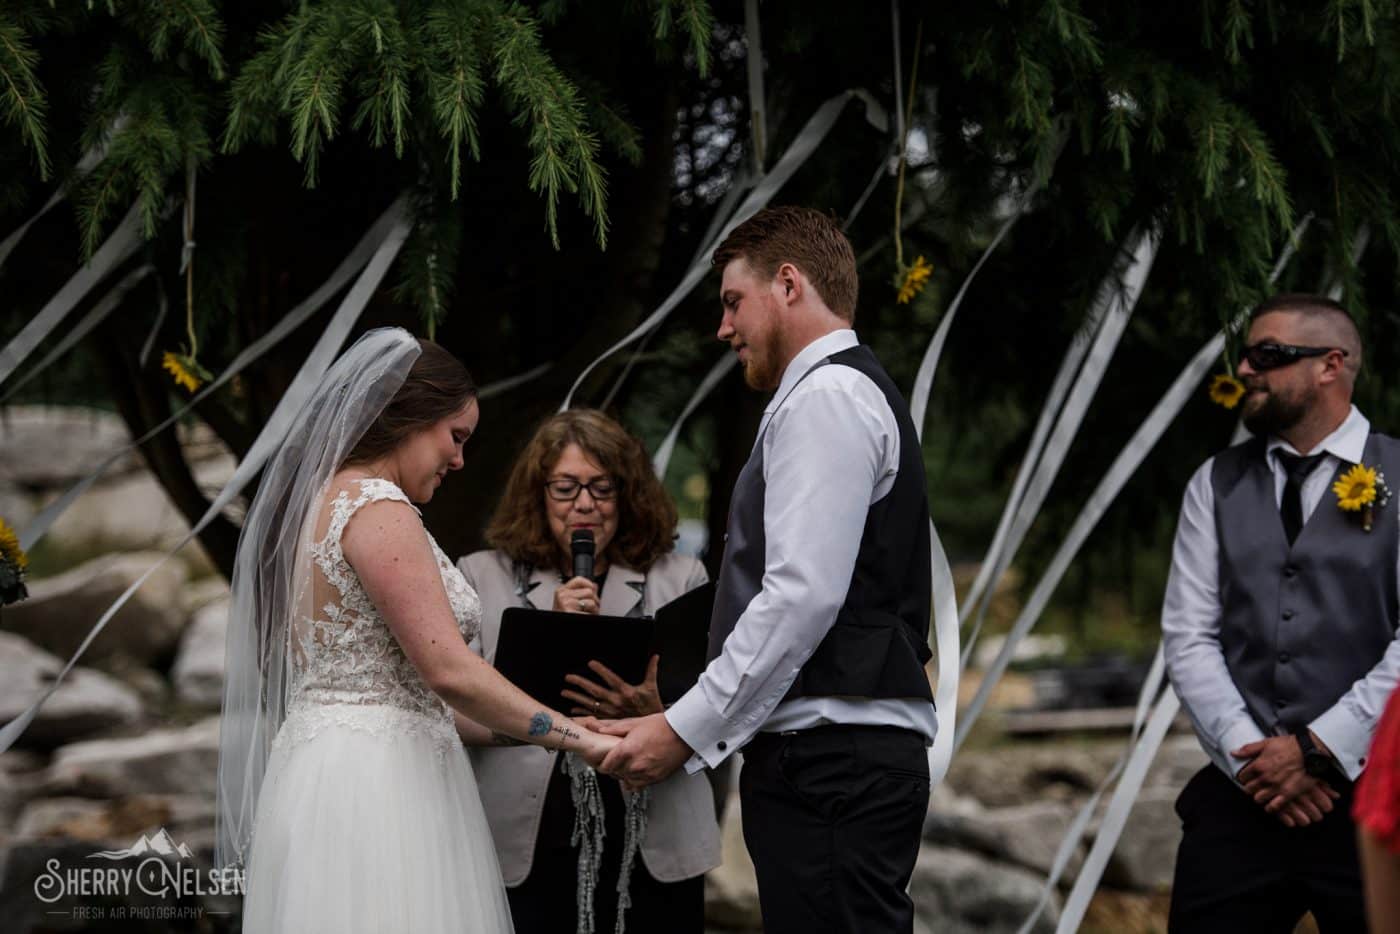 Shane and Shelby say their vows at their Sechelt BC Wedding